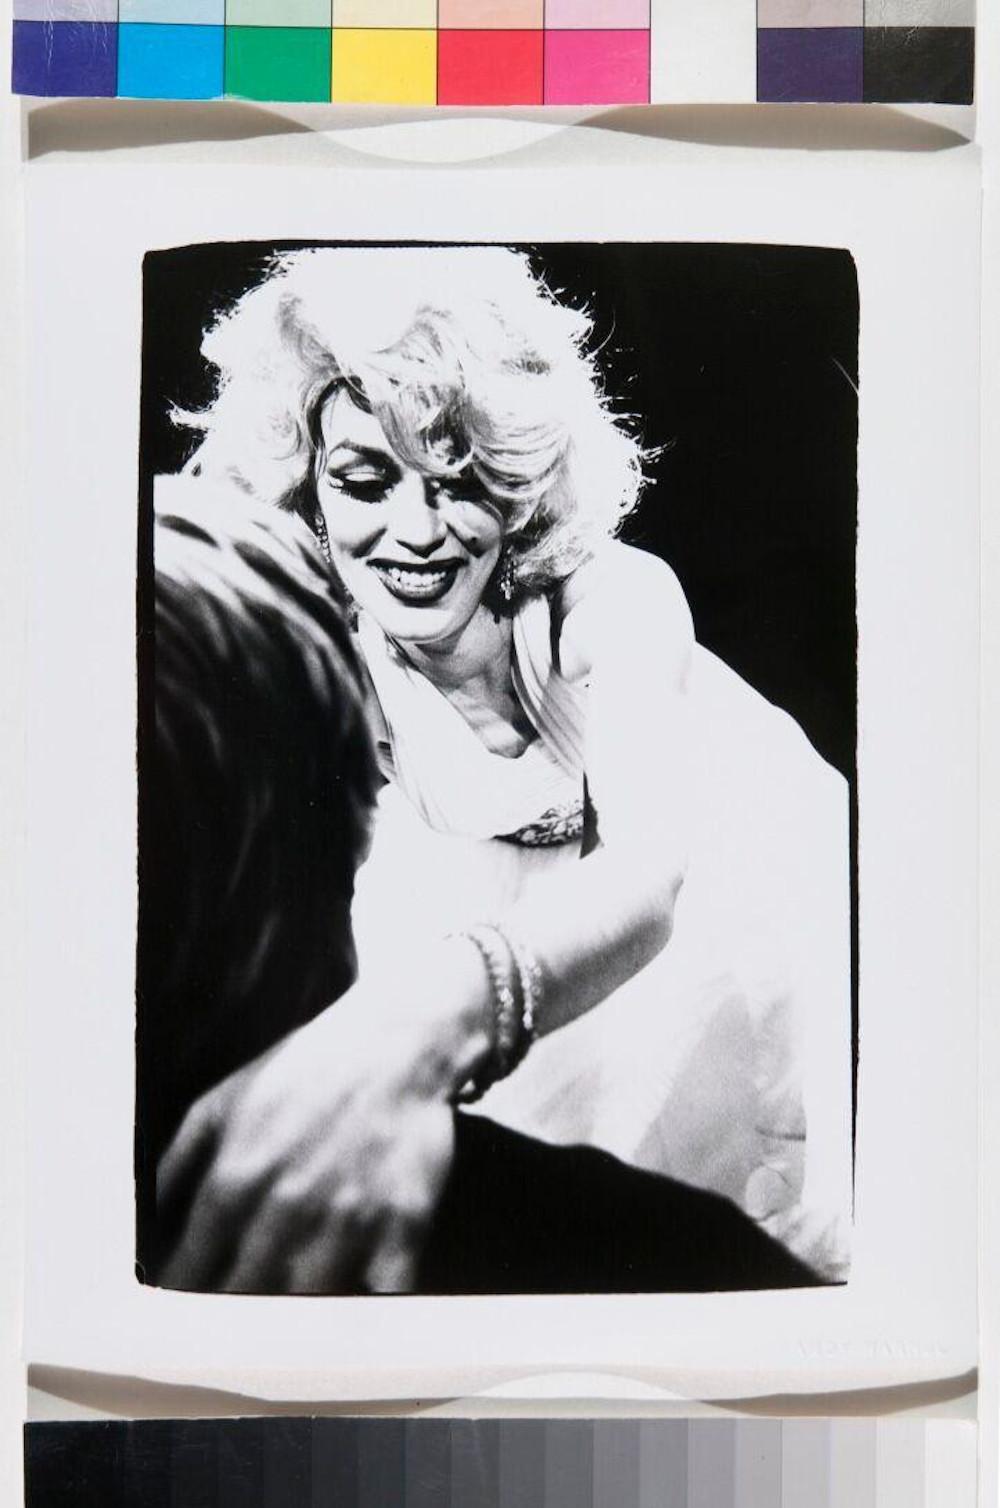 Andy Warhol Black and White Photograph - Photograph of a Marilyn Monroe Drag Impersonator